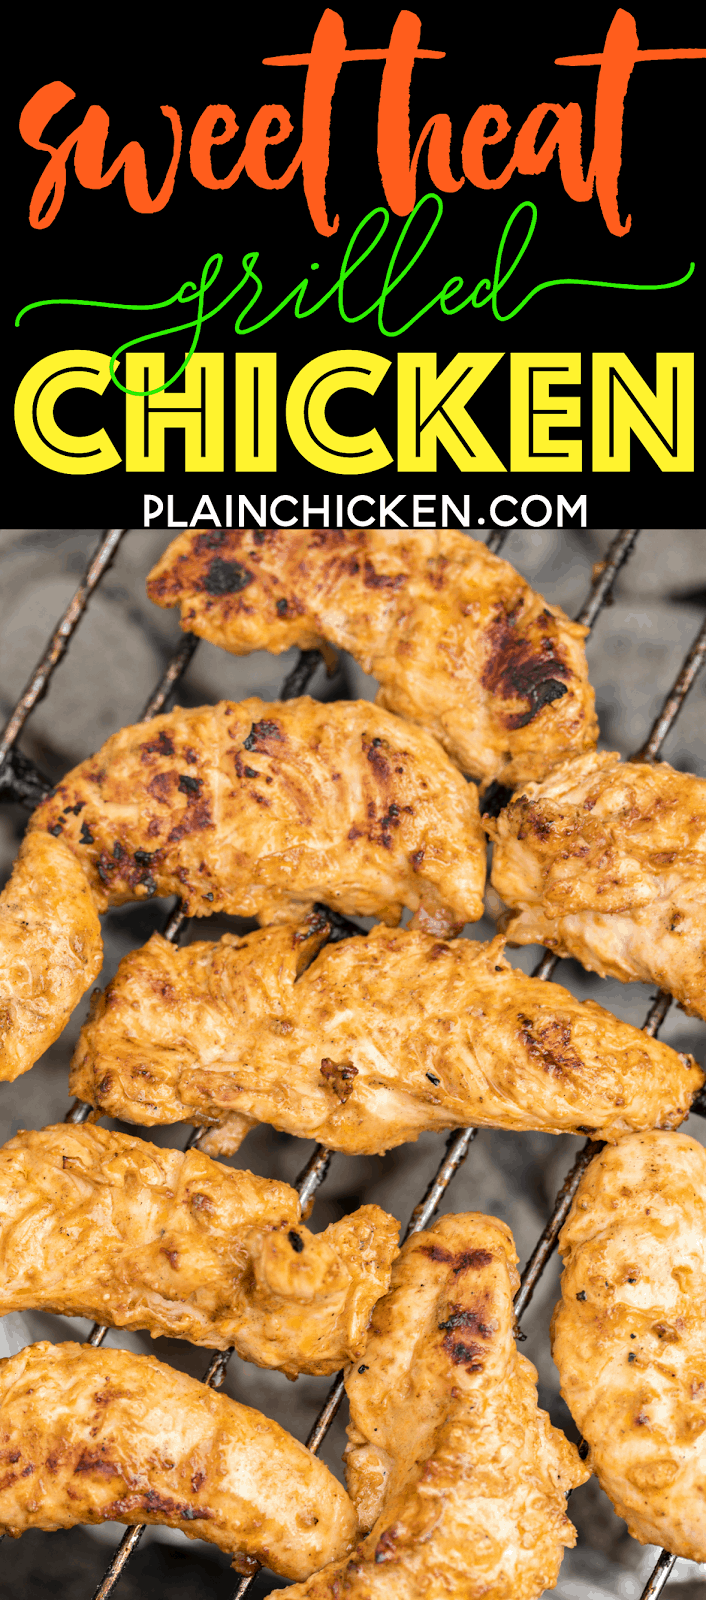 Sweet Heat Chicken - hot sauce and brown sugar marinated chicken that is totally ADDICTING! This is the perfect combination of sweet and spicy! Hot sauce, vinegar, olive oil, onion, garlic, Worcestershire, brown sugar. AMAZING flavor combination! We ate this twice in one week! SO good!